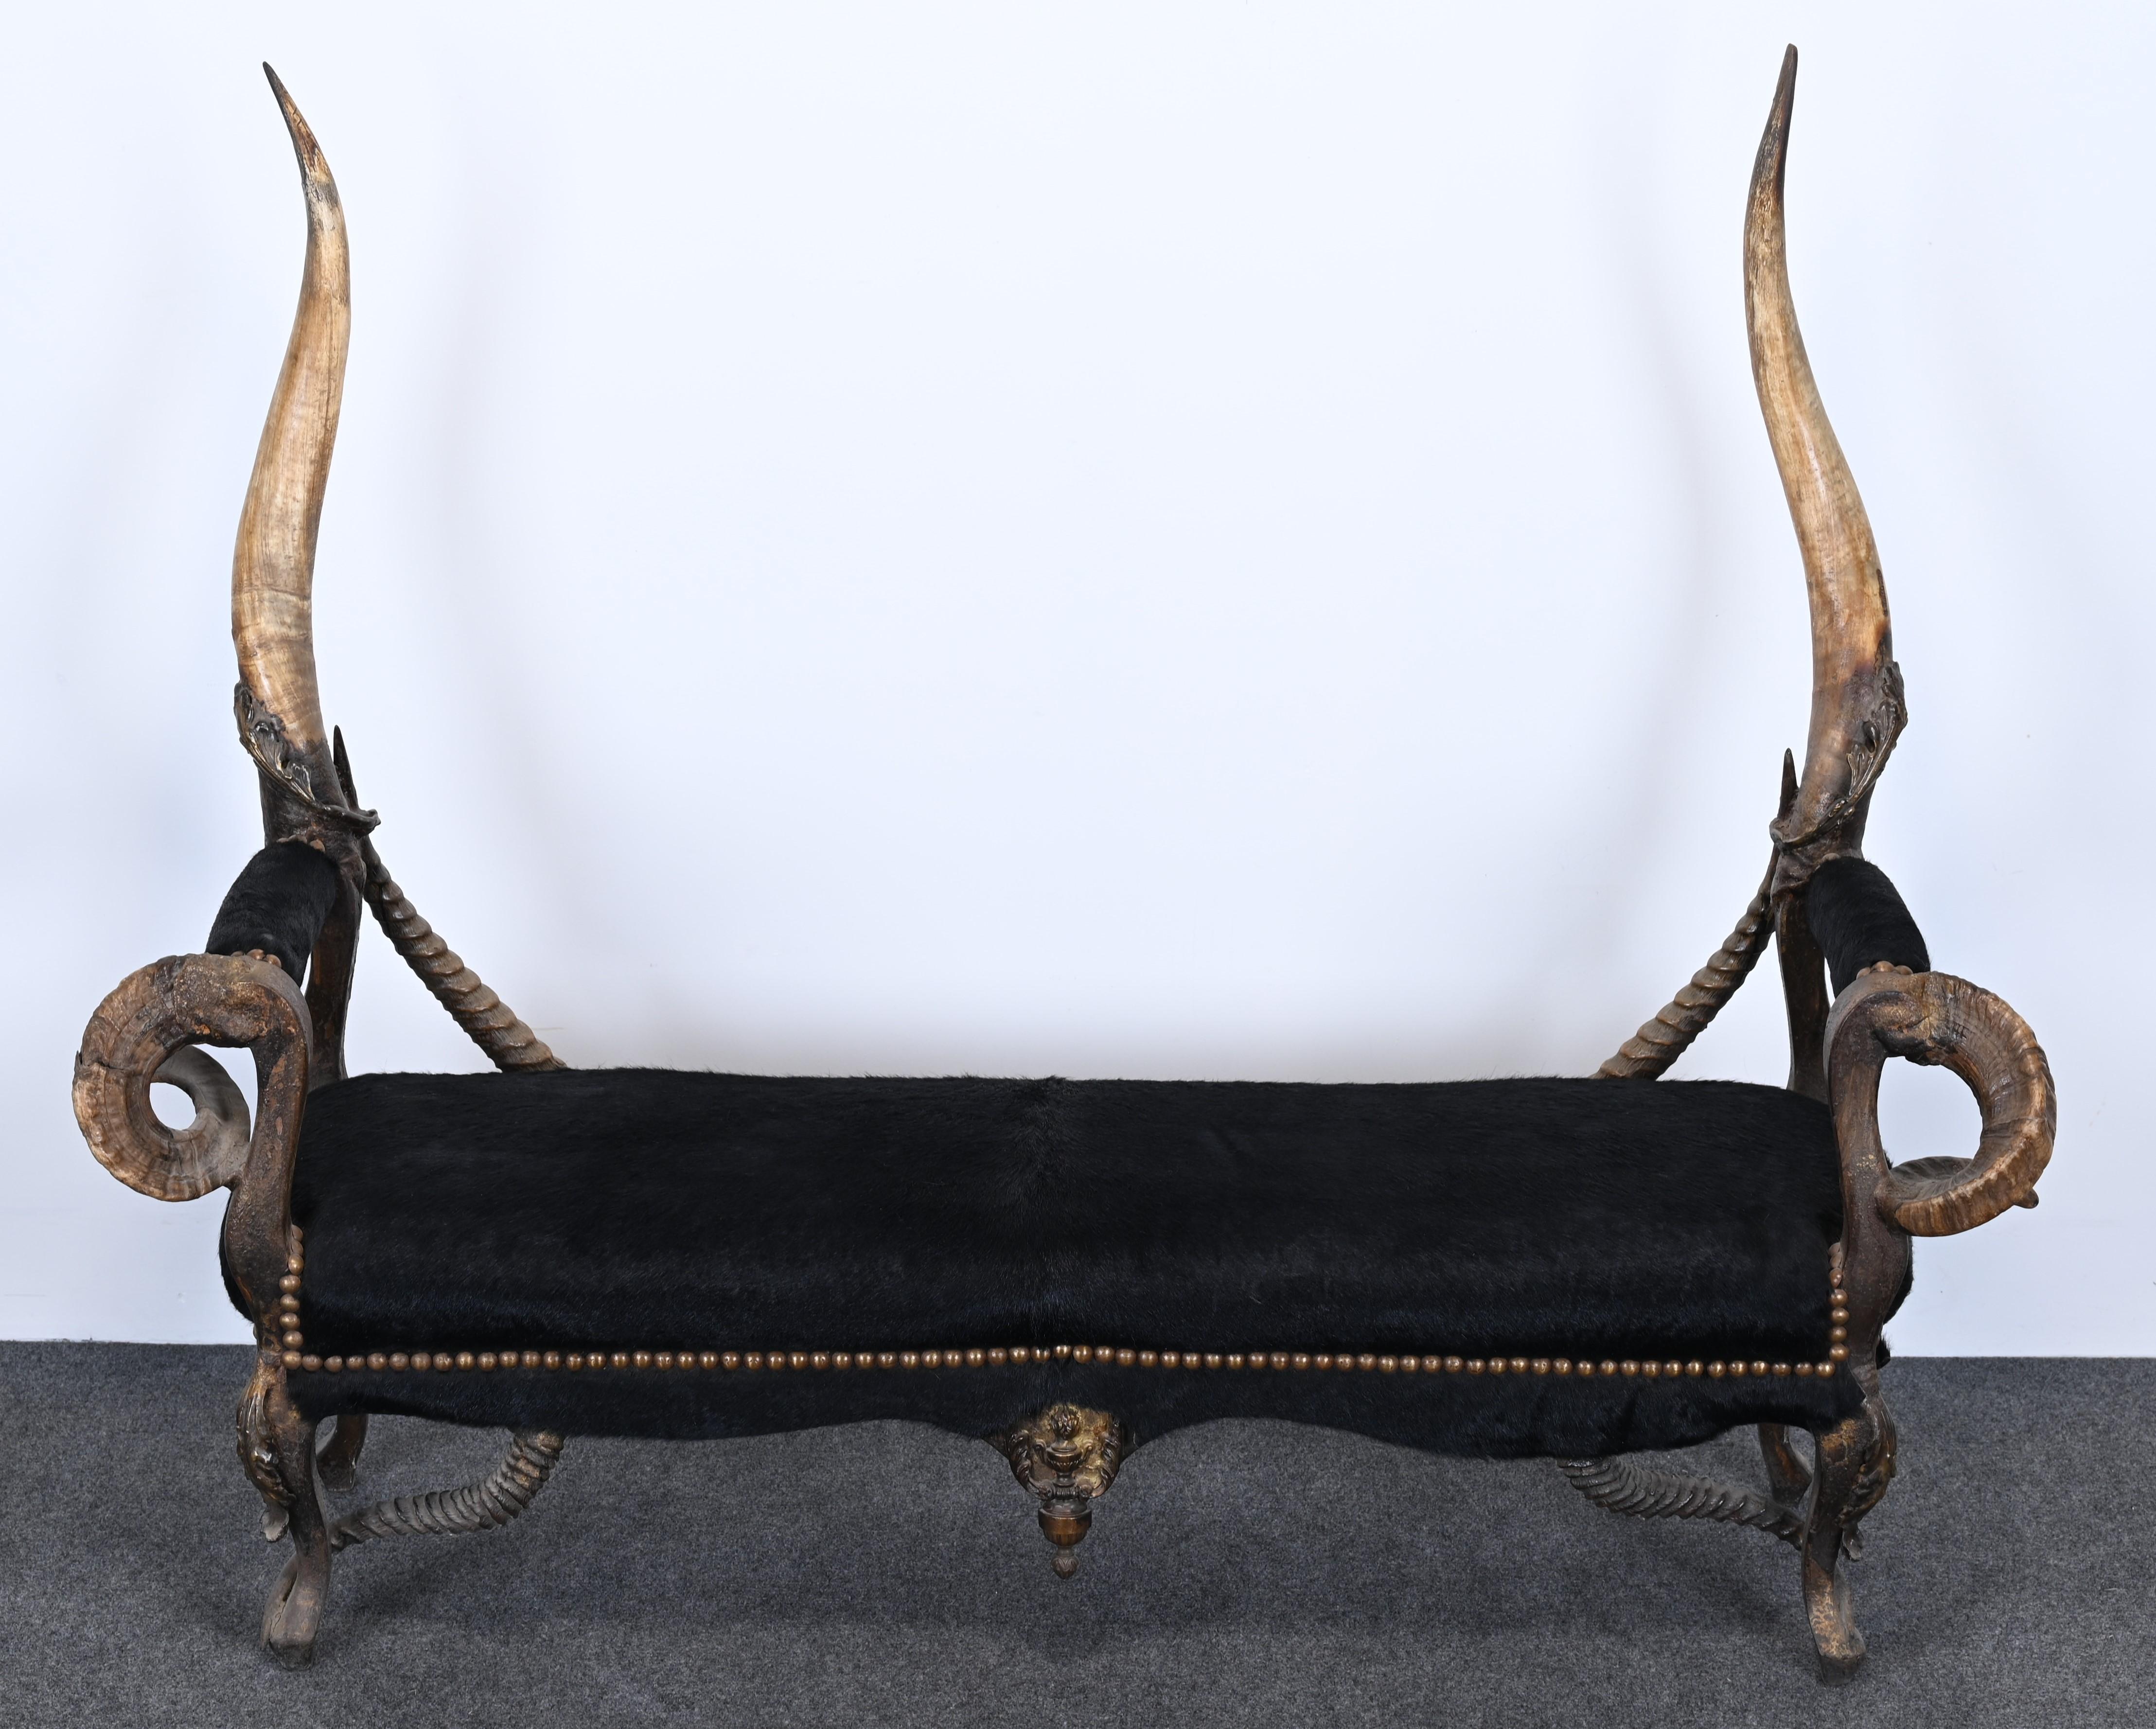 A large exotic and rustic horn bench with ormolu hardware. This amazing bench was designed and made by Michel Haillard of France. Intertwining horns, brass nailheads, and covered animal hide seat combine in a masterful design to create this Louis XV